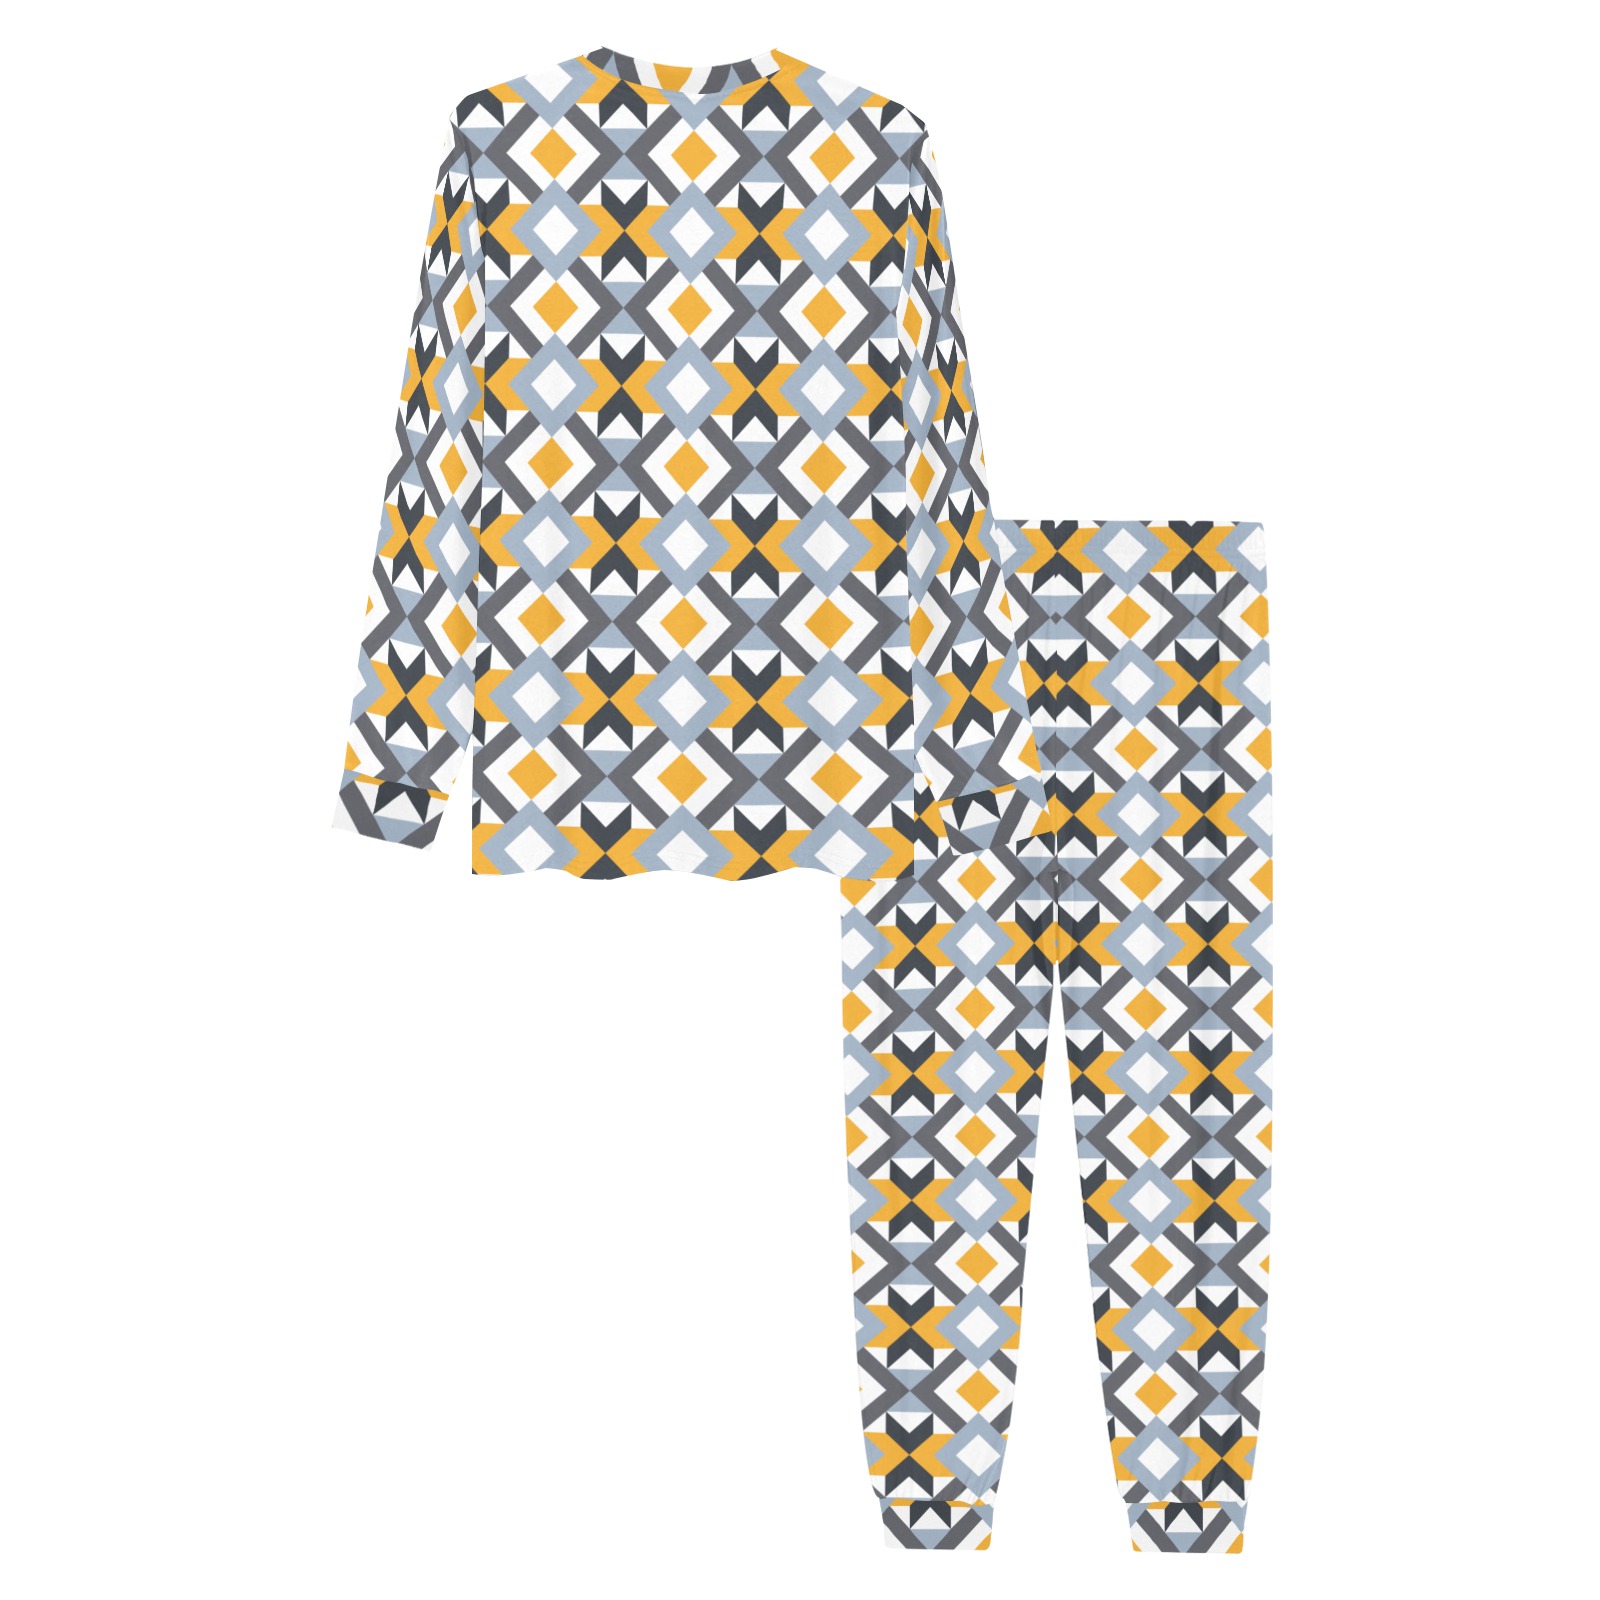 Retro Angles Abstract Geometric Pattern Men's All Over Print Pajama Set with Custom Cuff